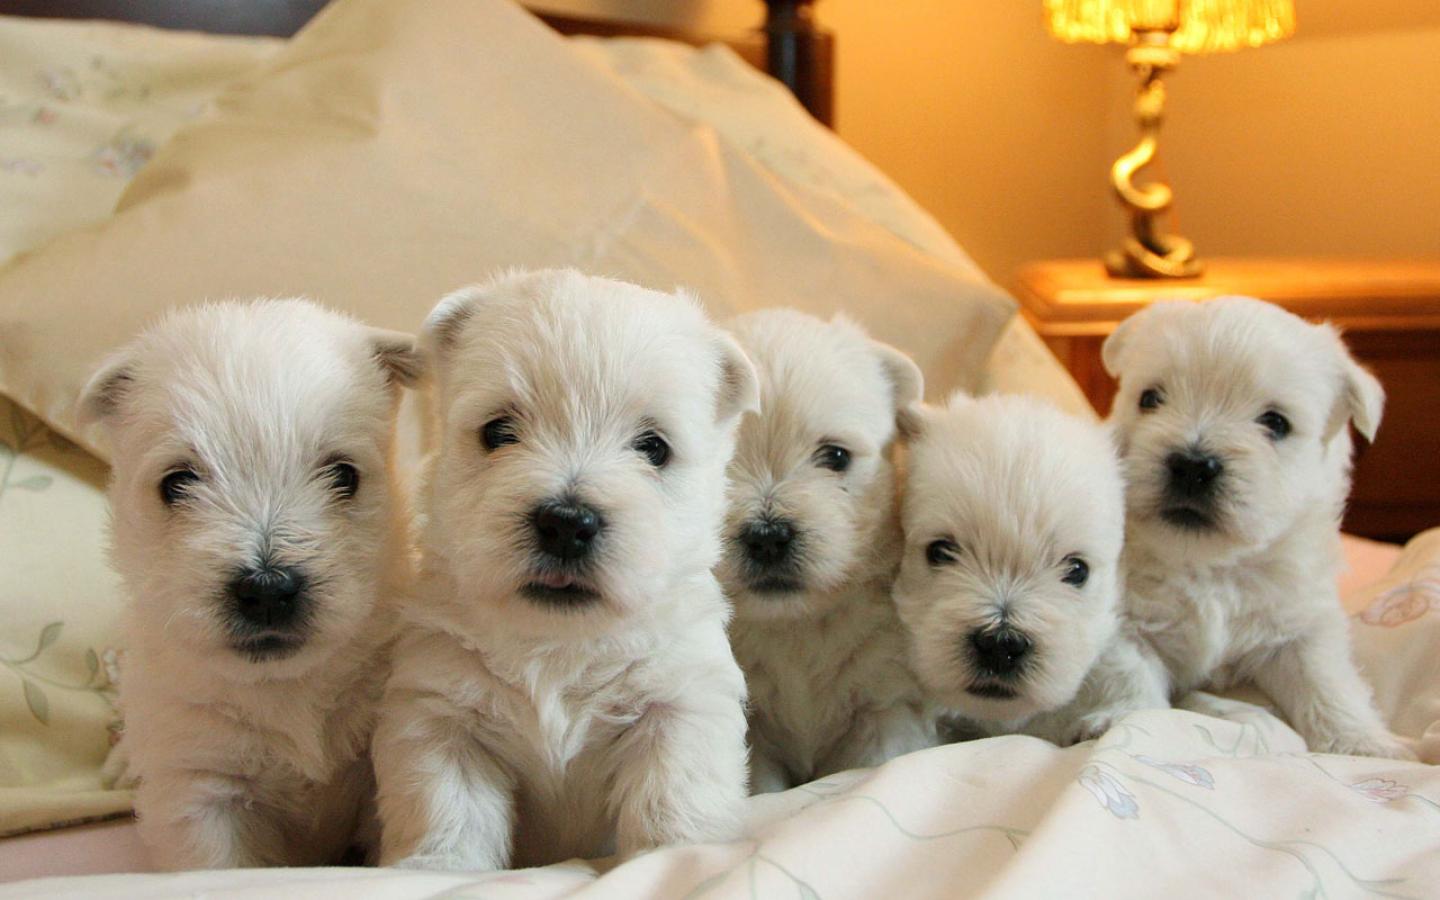 West Highland White Terrier - A Family Group of Westie Pups Wallpaper #2 1440 x 900 